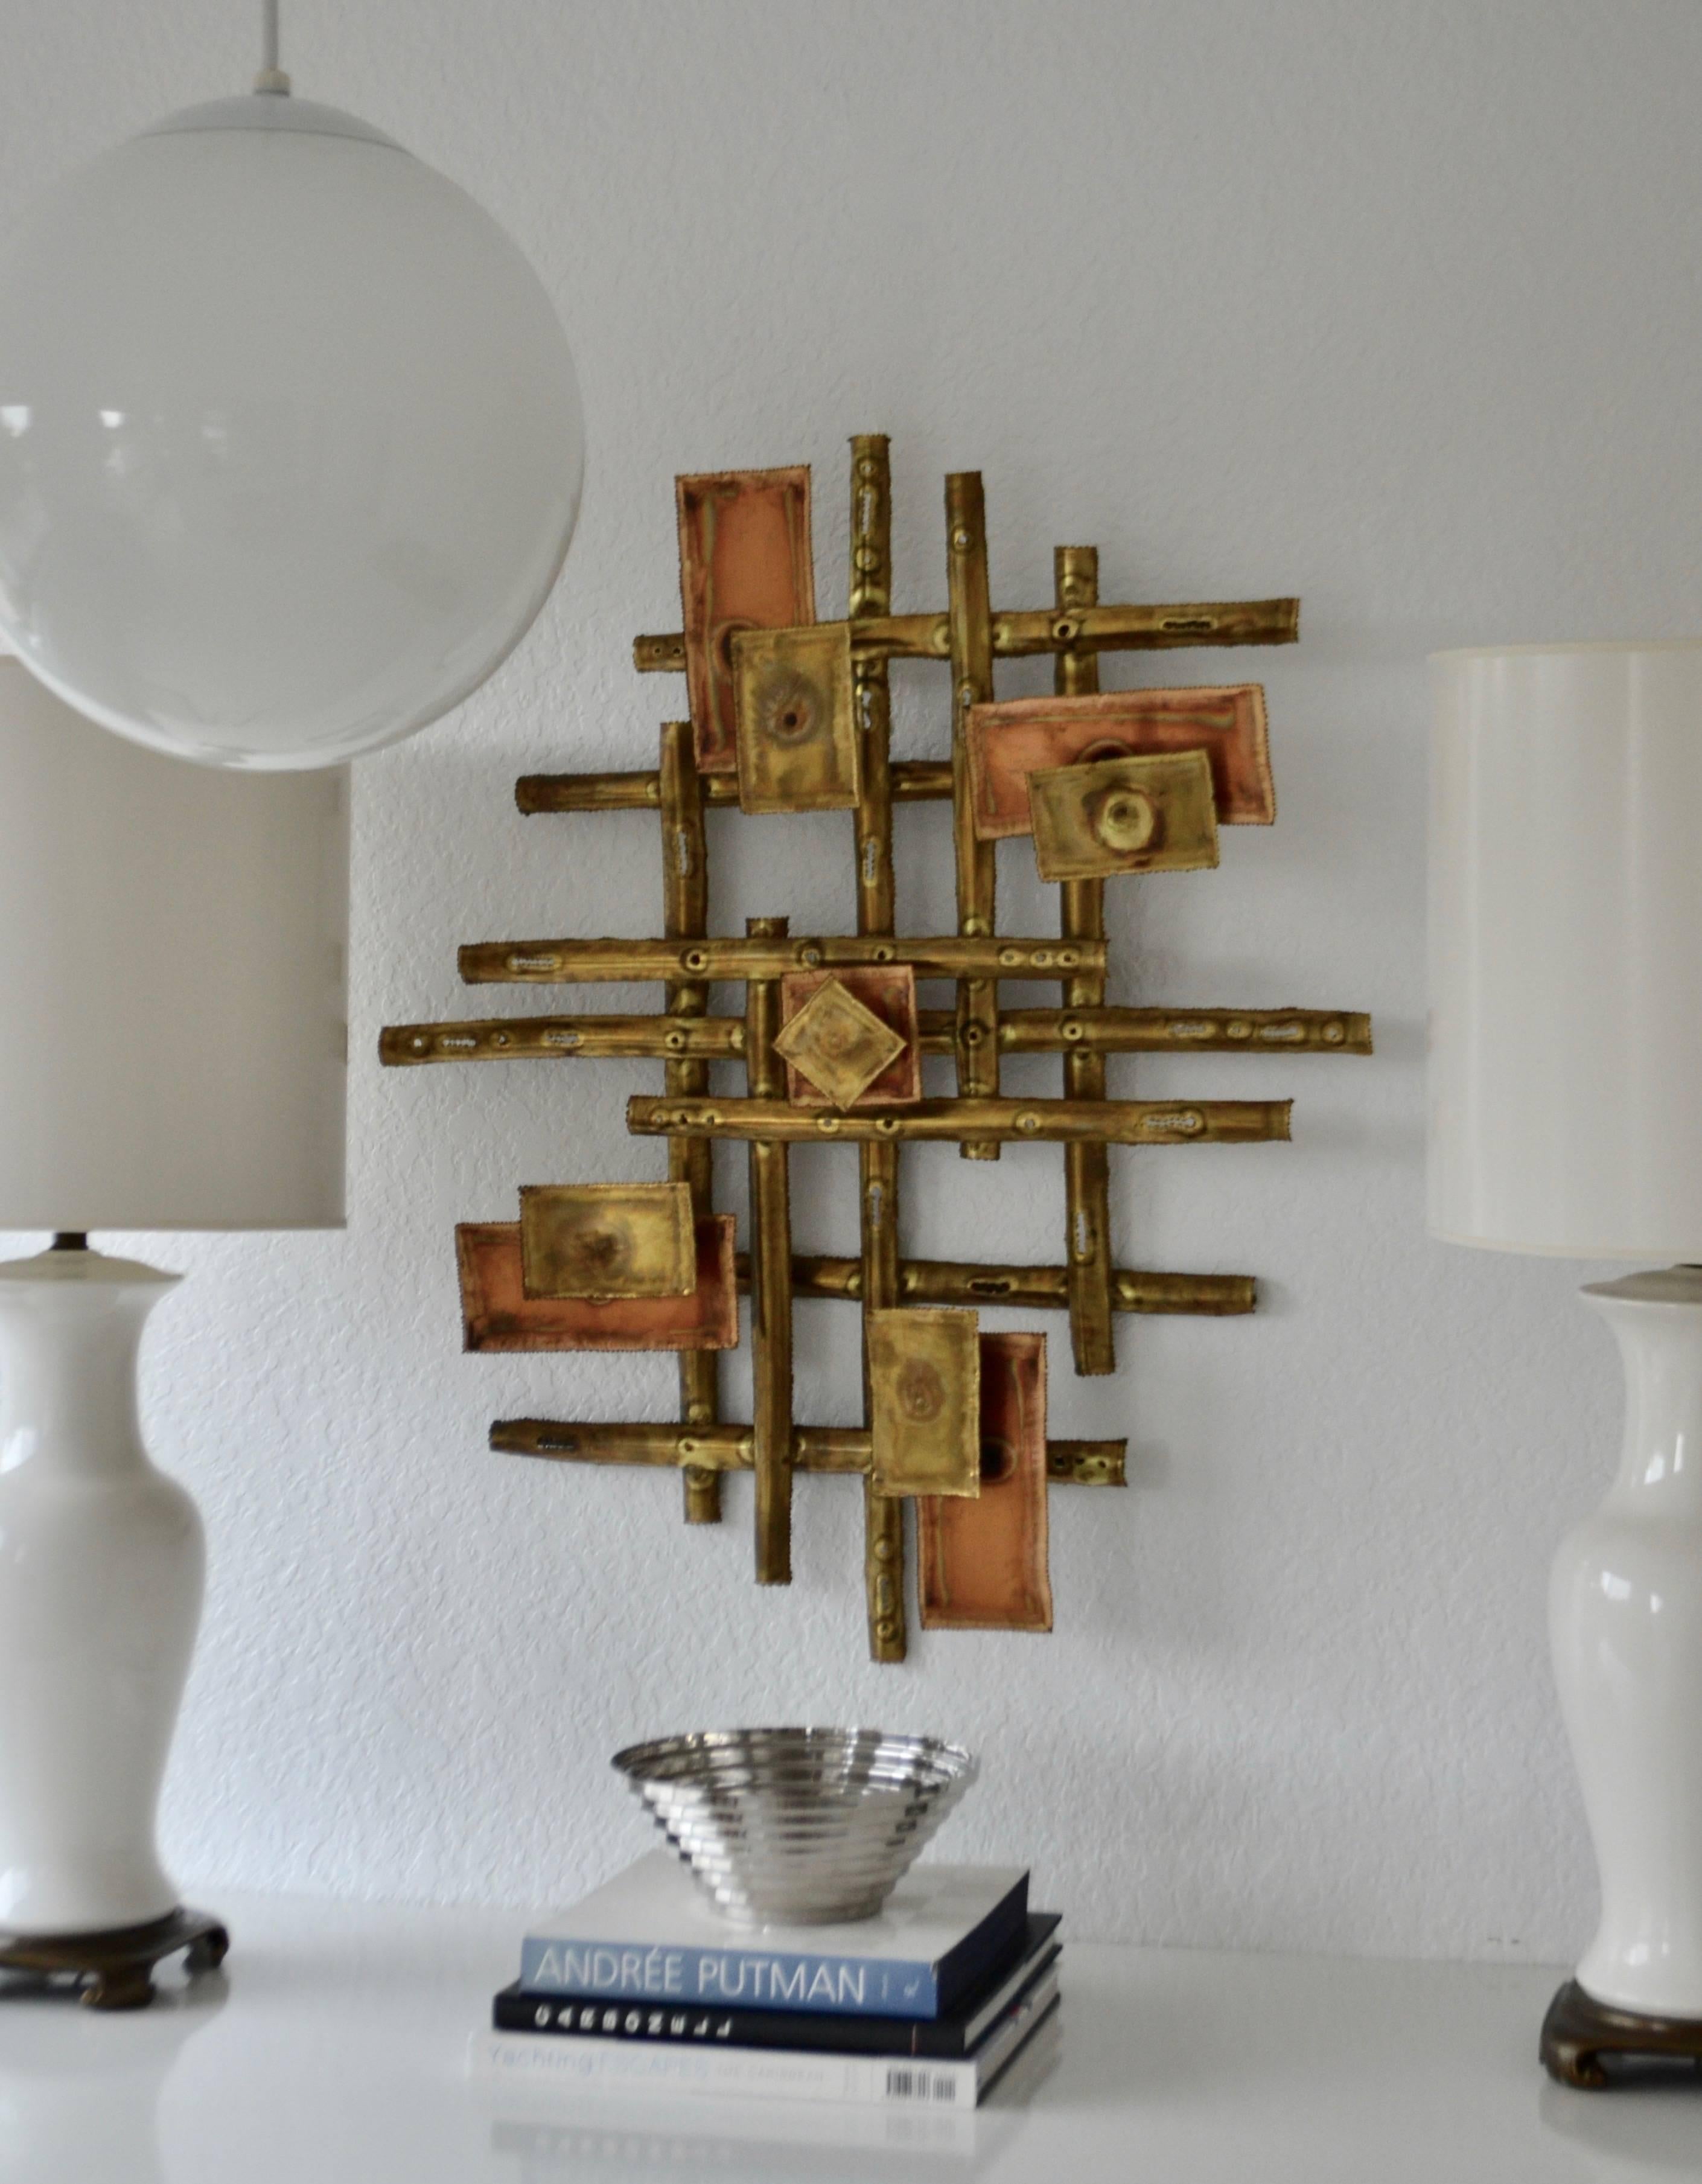 Stunning midcentury torch-cut mixed metal wall sculpture, circa 1960s. This striking Brutalist sculpture of polished and patinated brass is designed of layered rods and floating panels. Can be hung vertically or